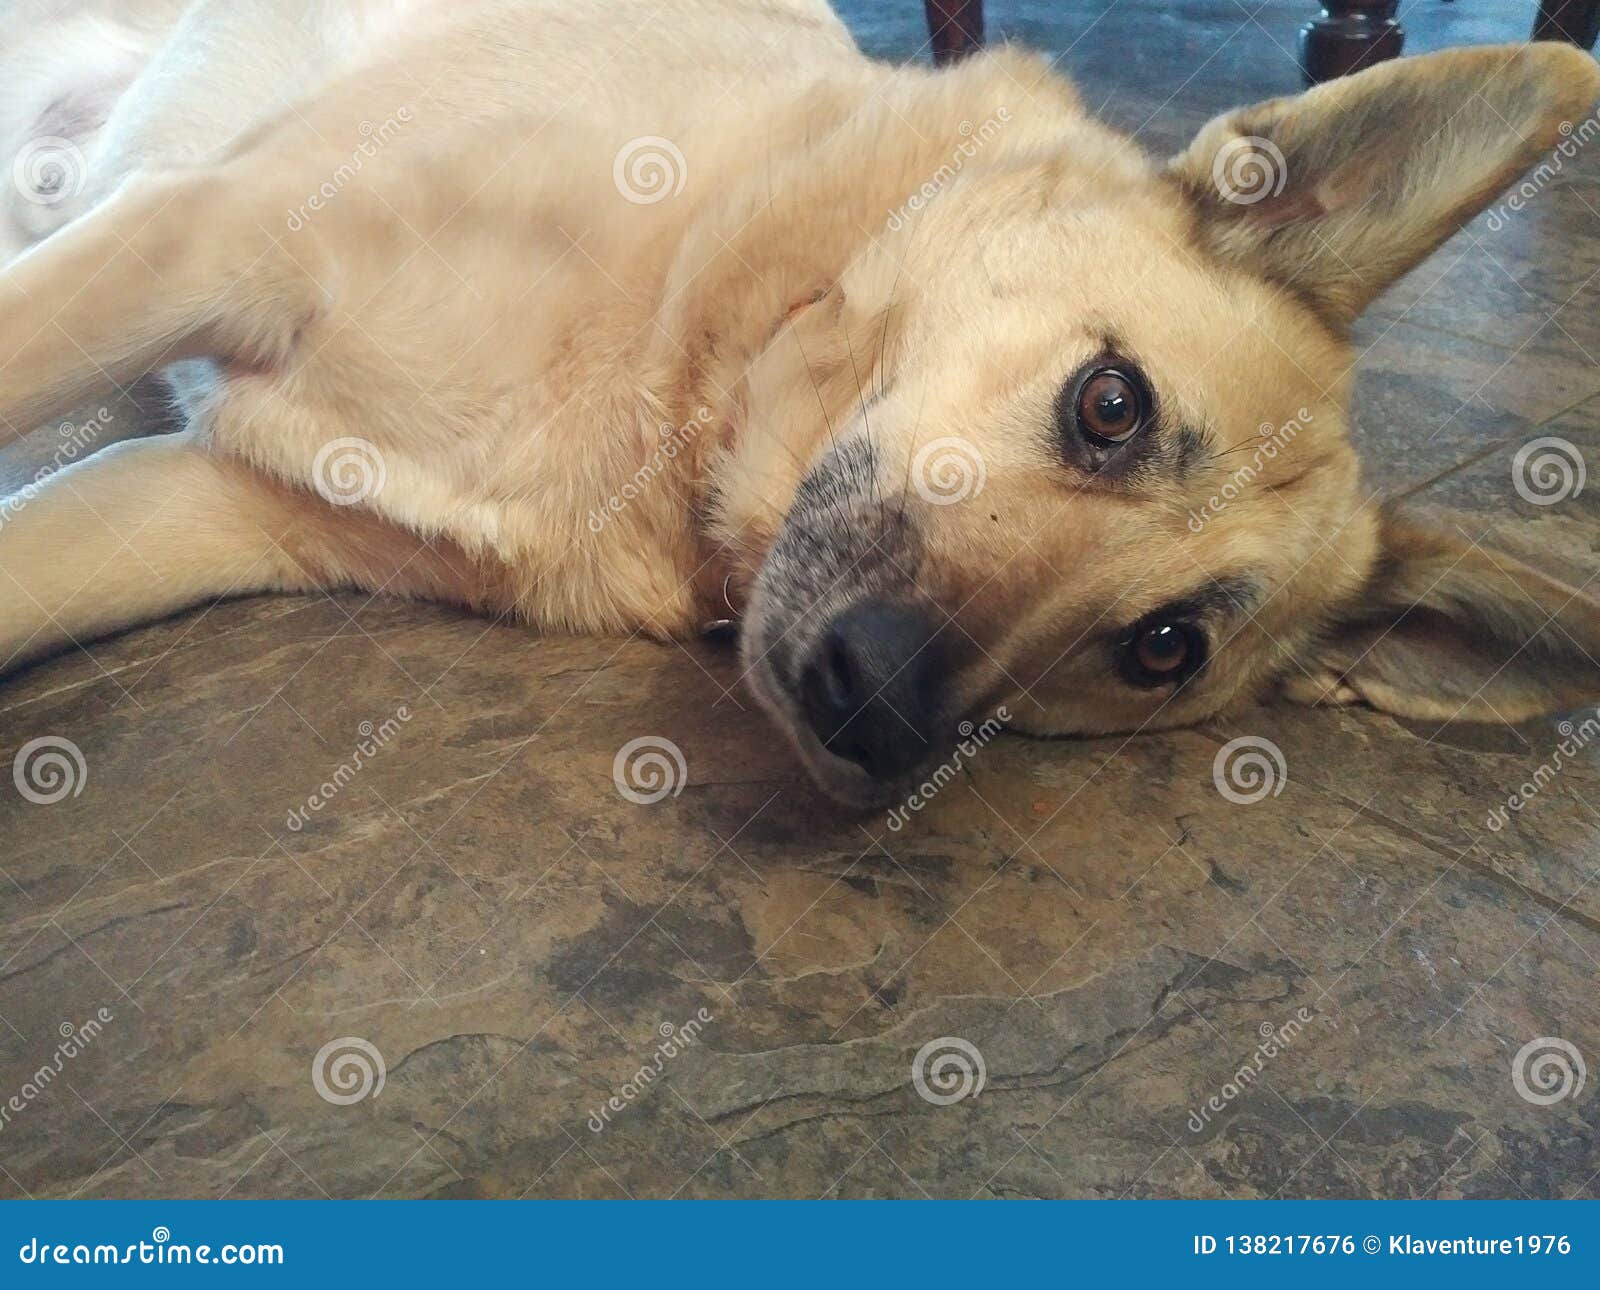 Dog laying down on floor stock photo. Image of laying - 138217676